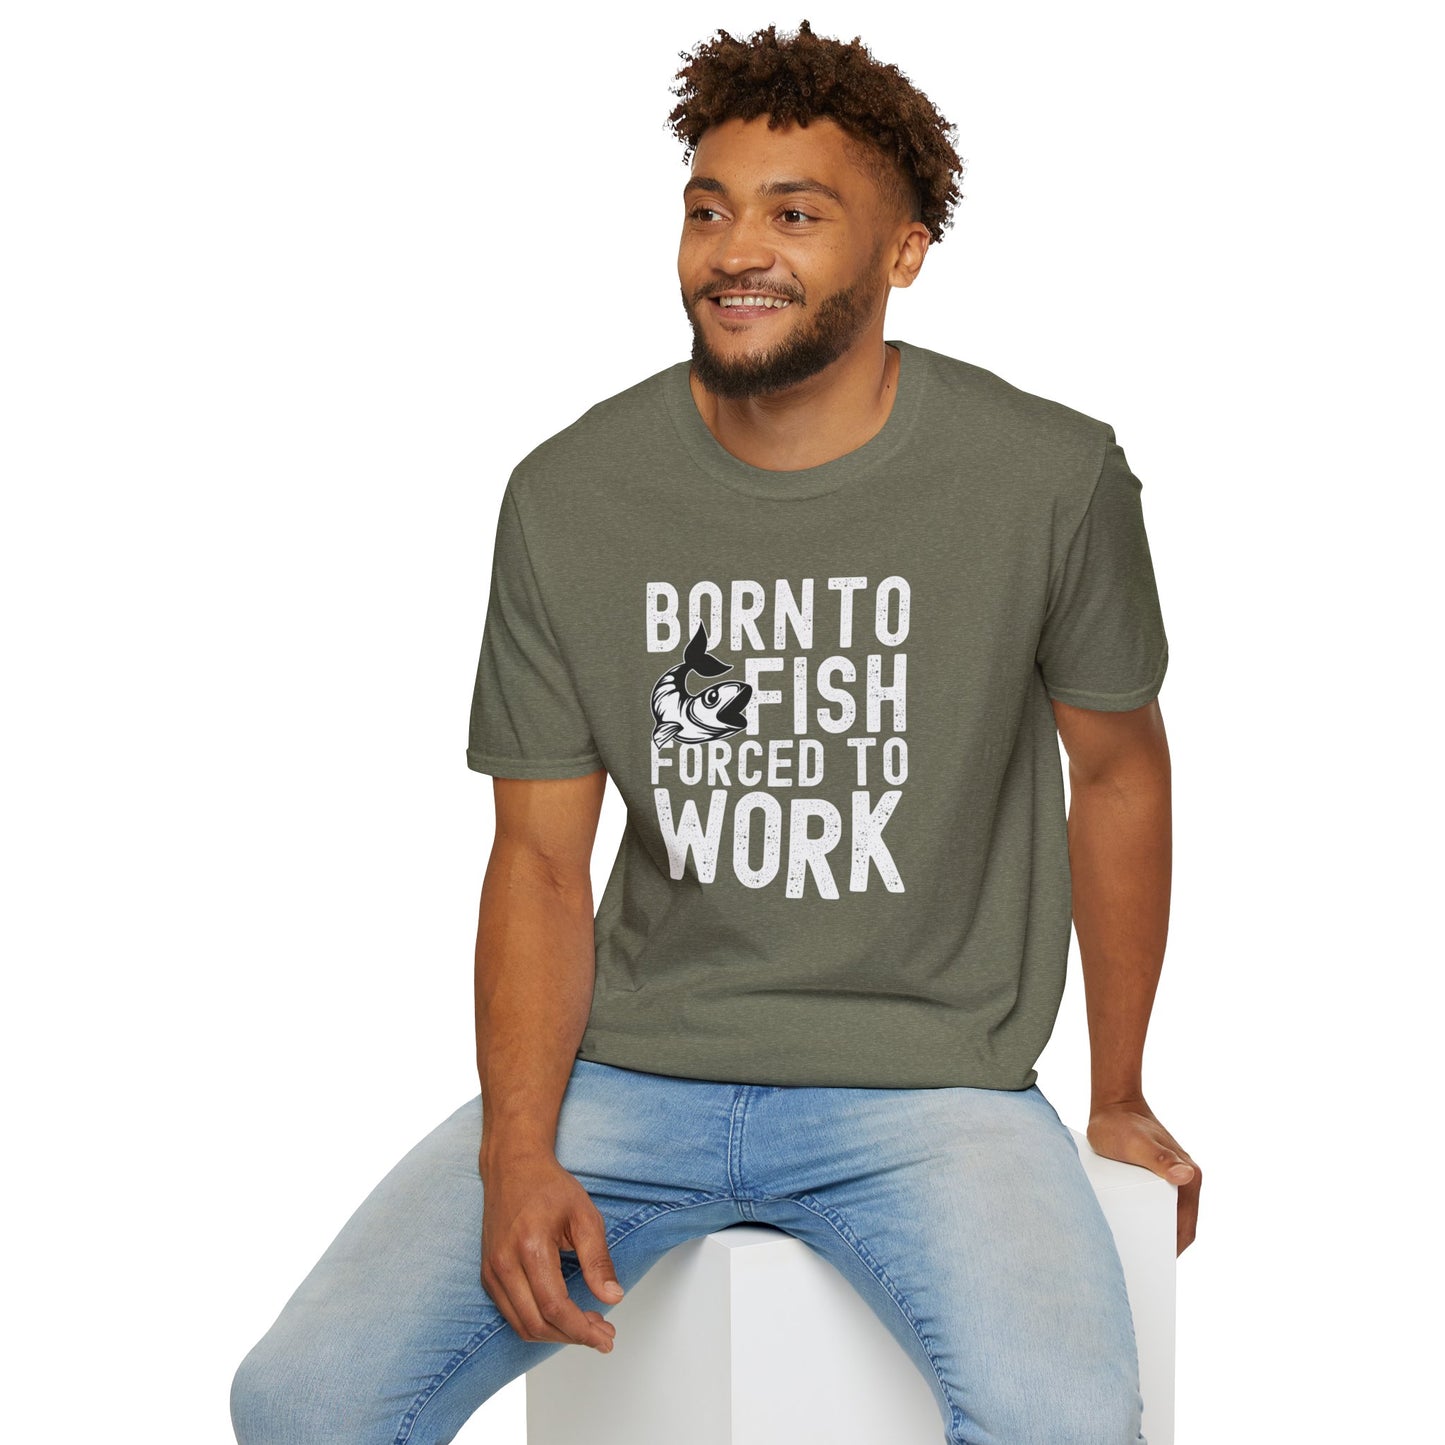 Born To Fish Forced to Work T-Shirts: Embrace Your Passion in Style!